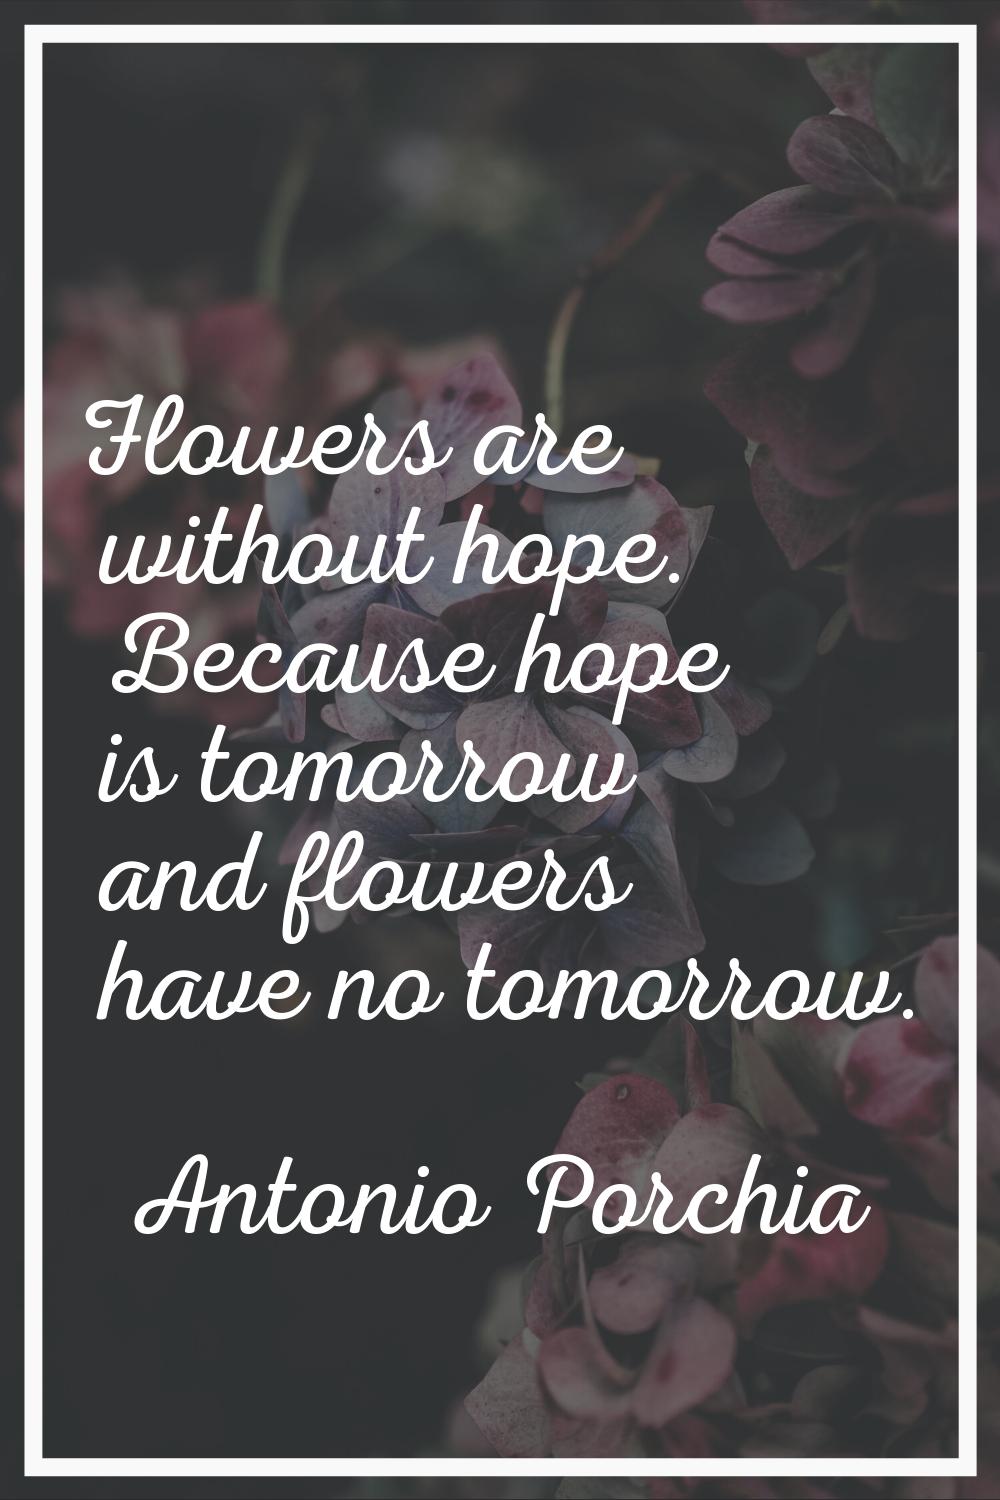 Flowers are without hope. Because hope is tomorrow and flowers have no tomorrow.